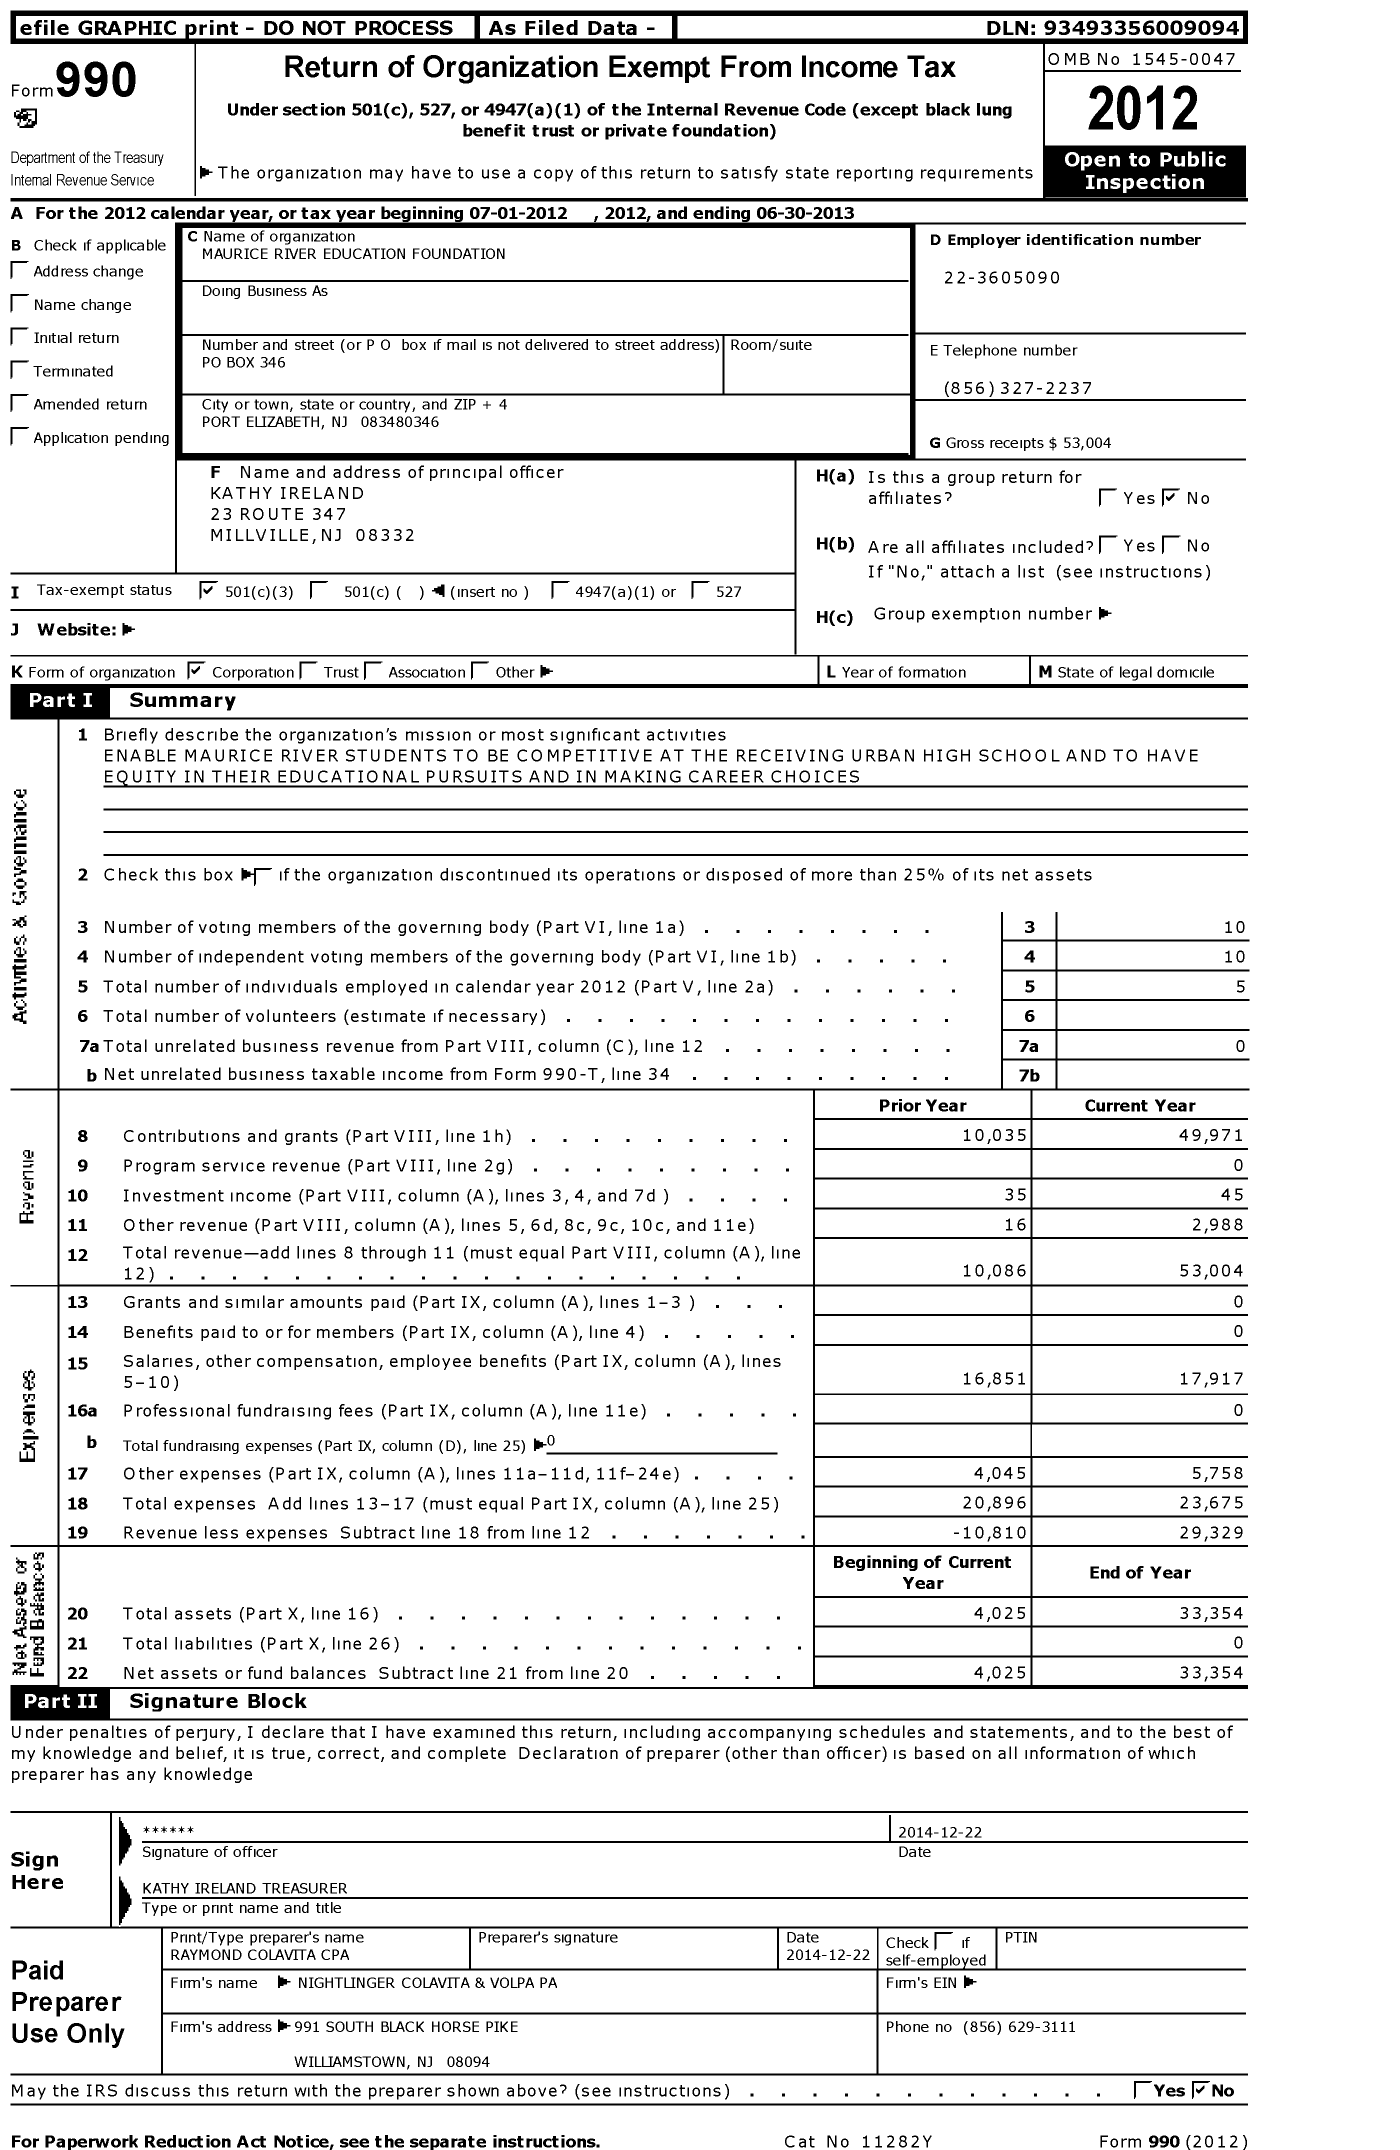 Image of first page of 2012 Form 990 for Maurice River Education Foundation